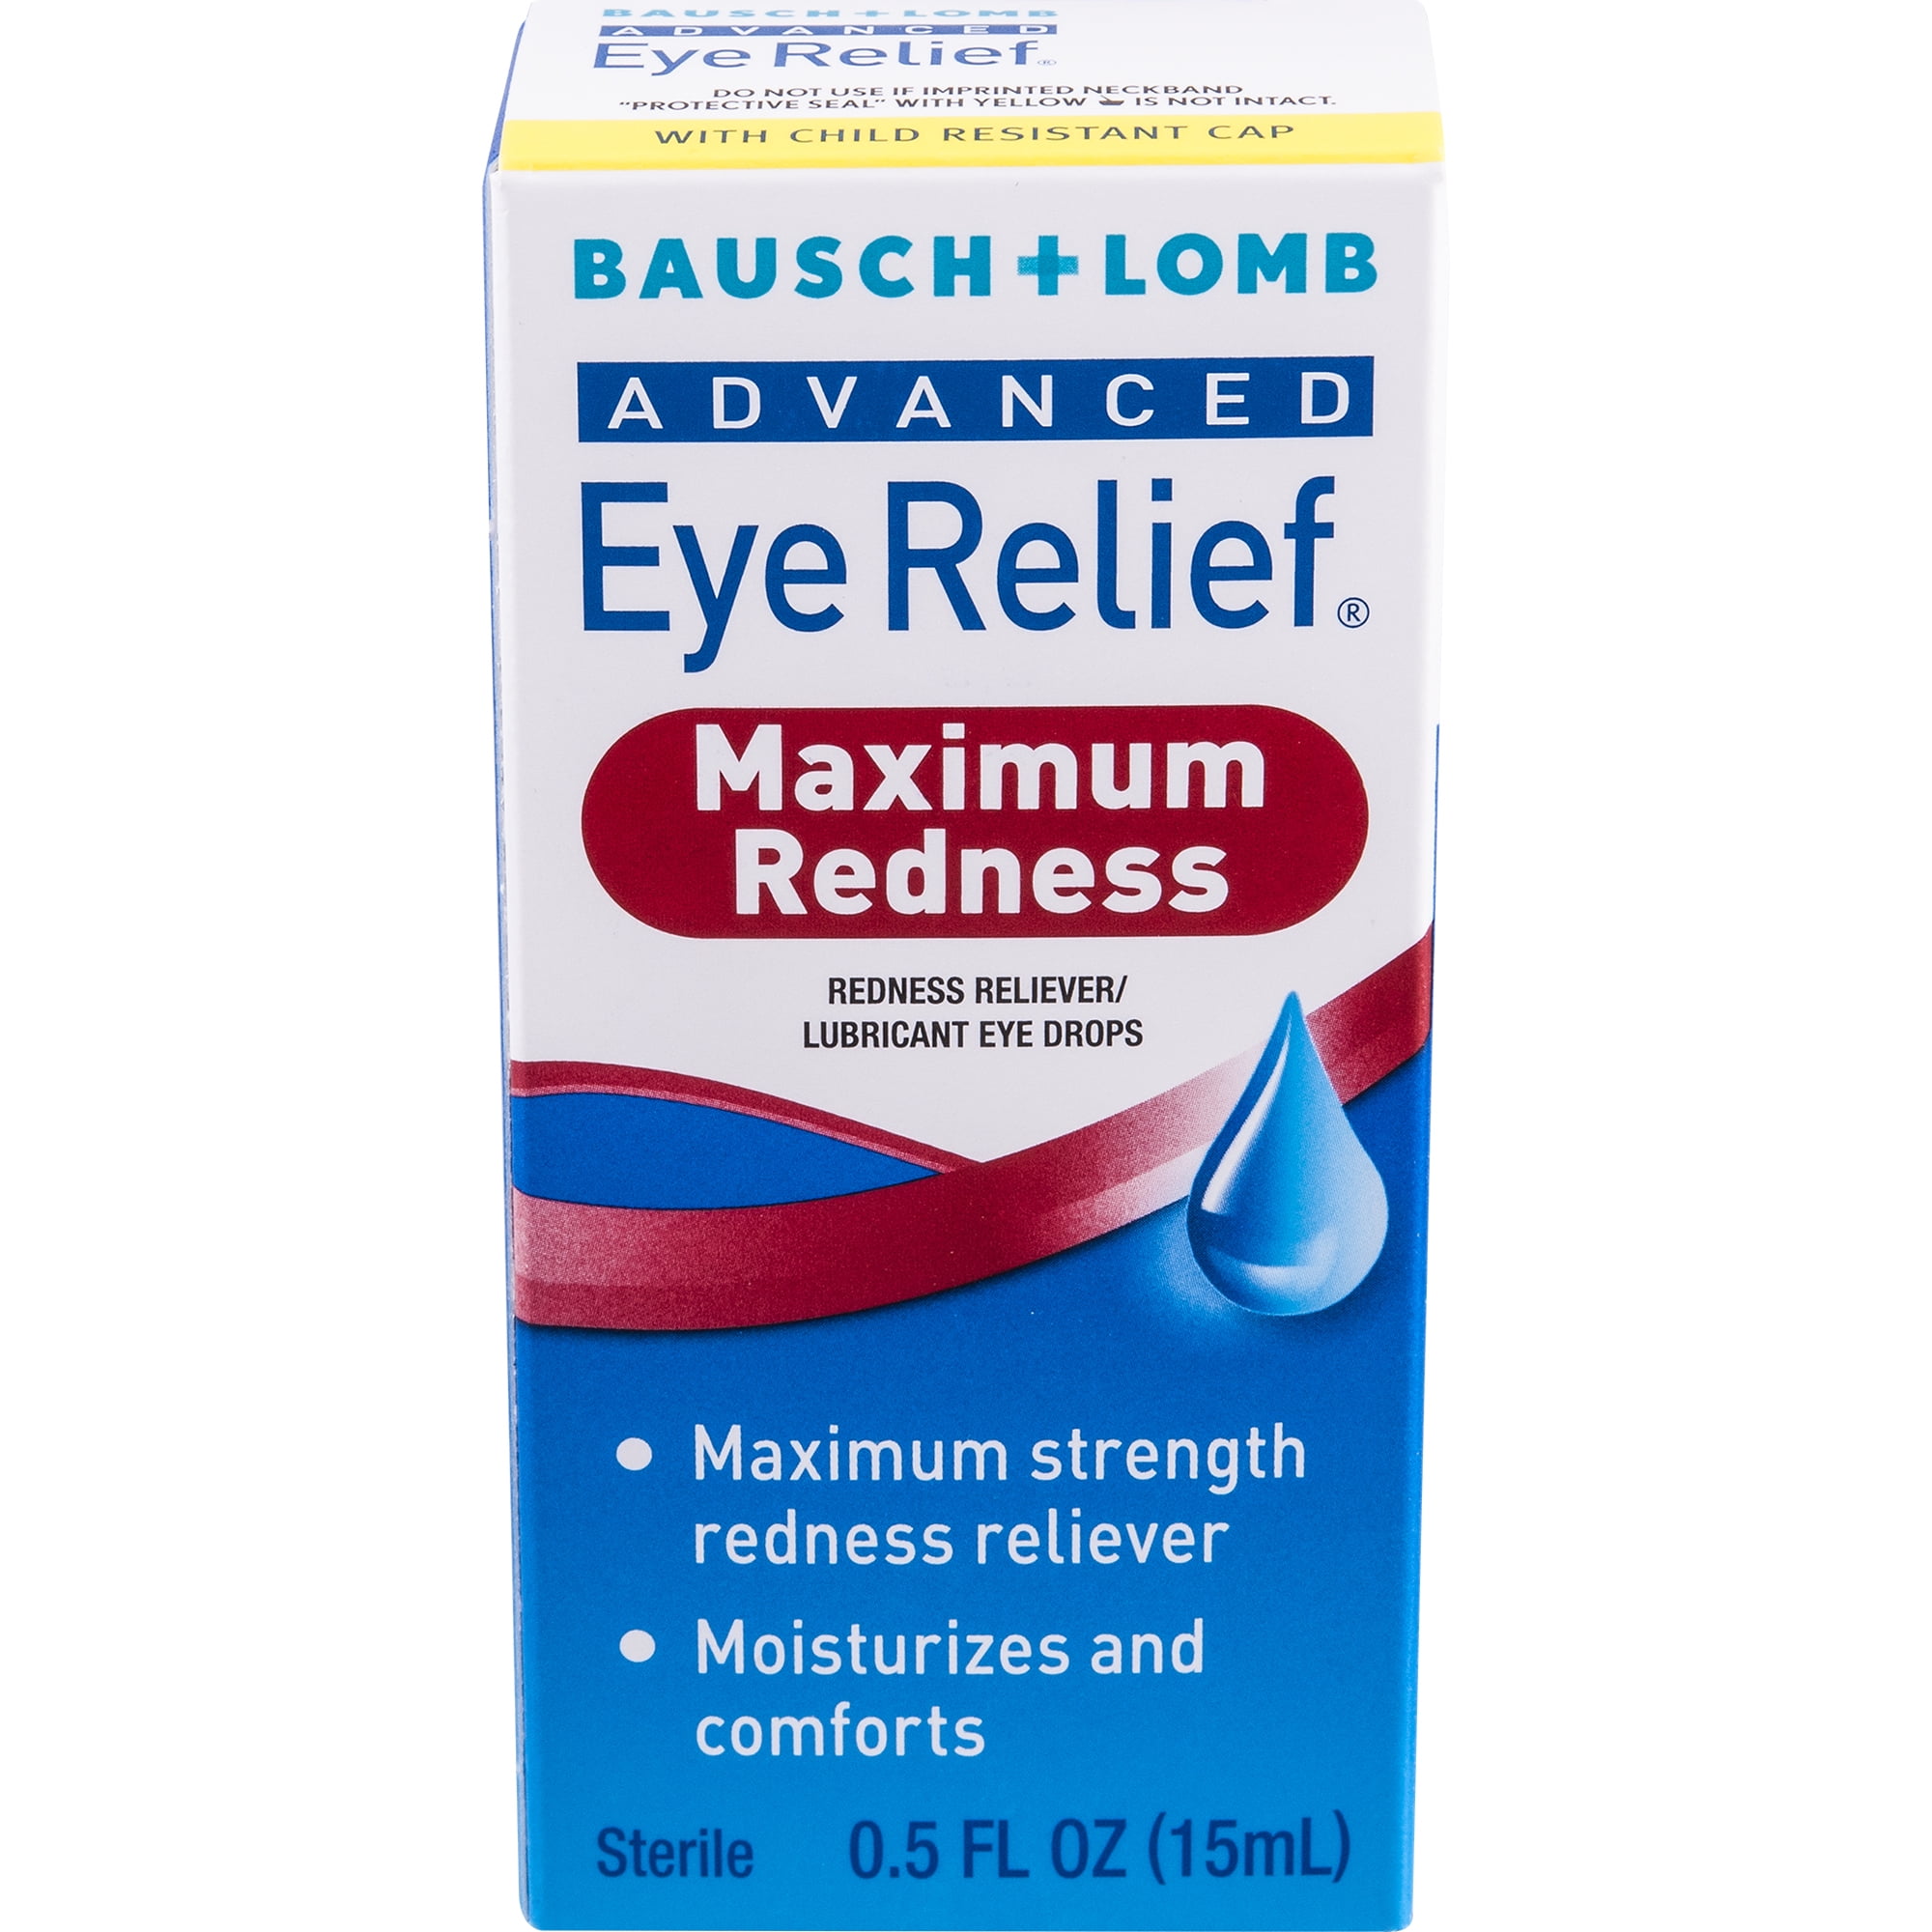 Bausch + Lomb Advanced Eye Relief Maximum Relief Lubricant/Redness